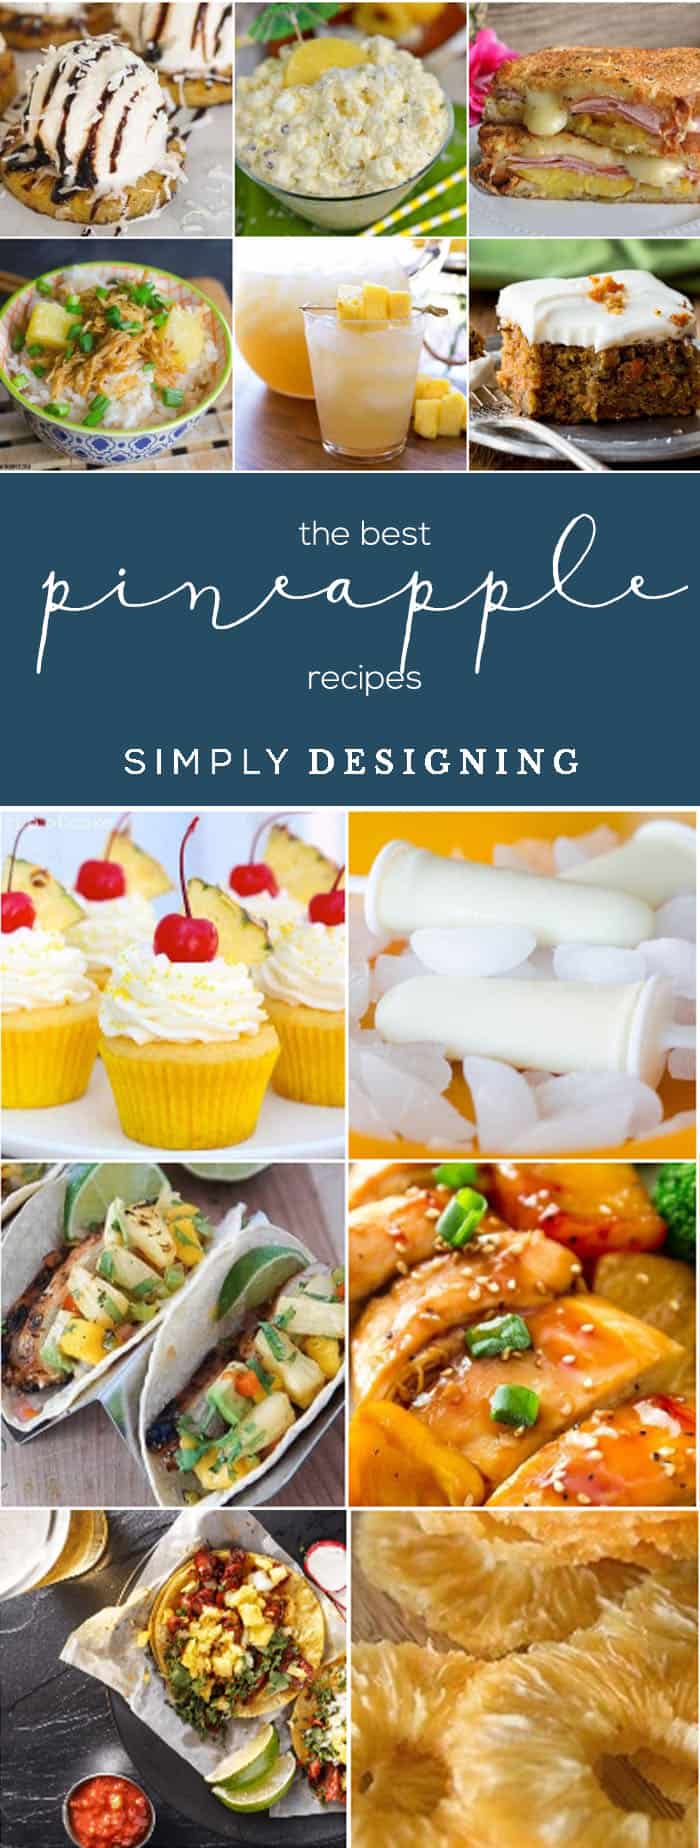 the best pineapple recipes pin 25+ Pineapple Recipes for the Perfect Summer Treat 28 Valentine's Day Crafts